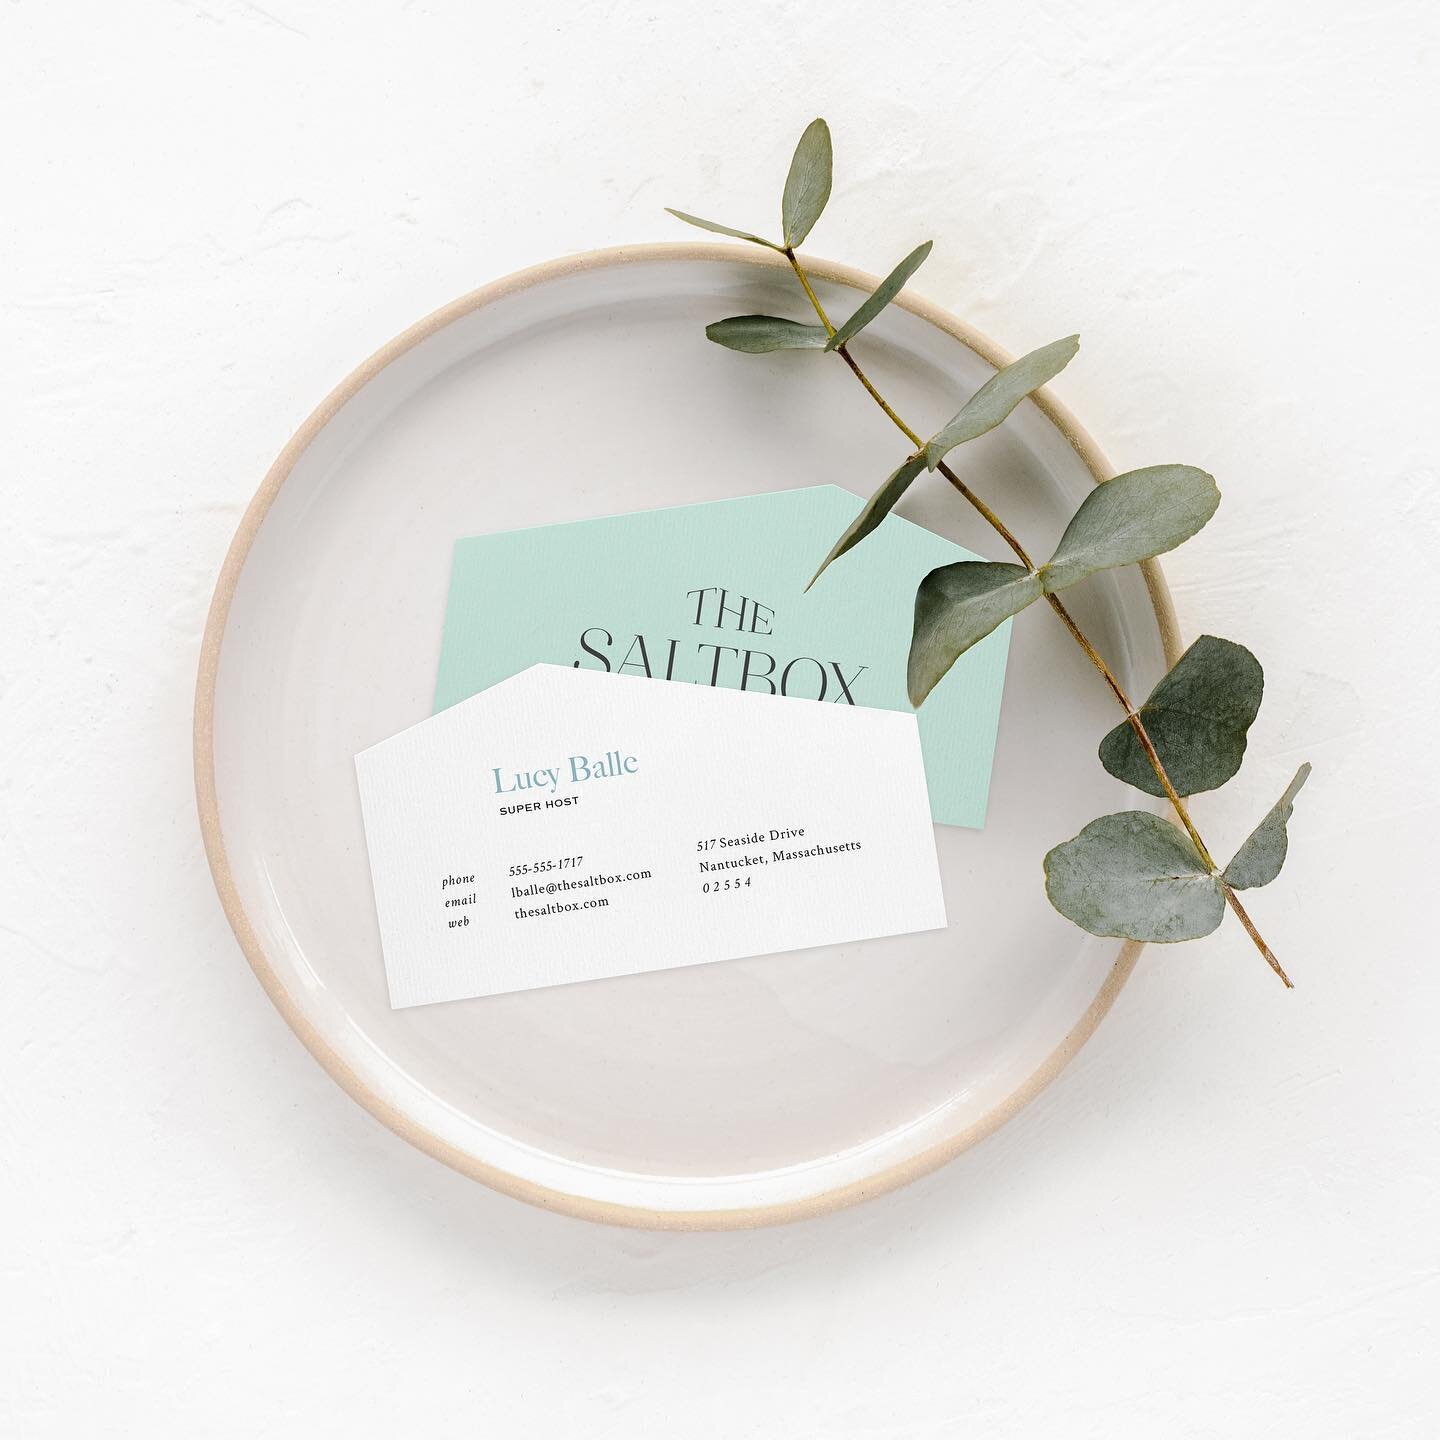 ✨ Personal Project ✨ The brand concept for The Saltbox, a Nantucket AirBnb, is centered around the home&rsquo;s architecture. A saltbox house has two stories in the front and one in the back, creating a long roof that slopes down. 

Since their shape